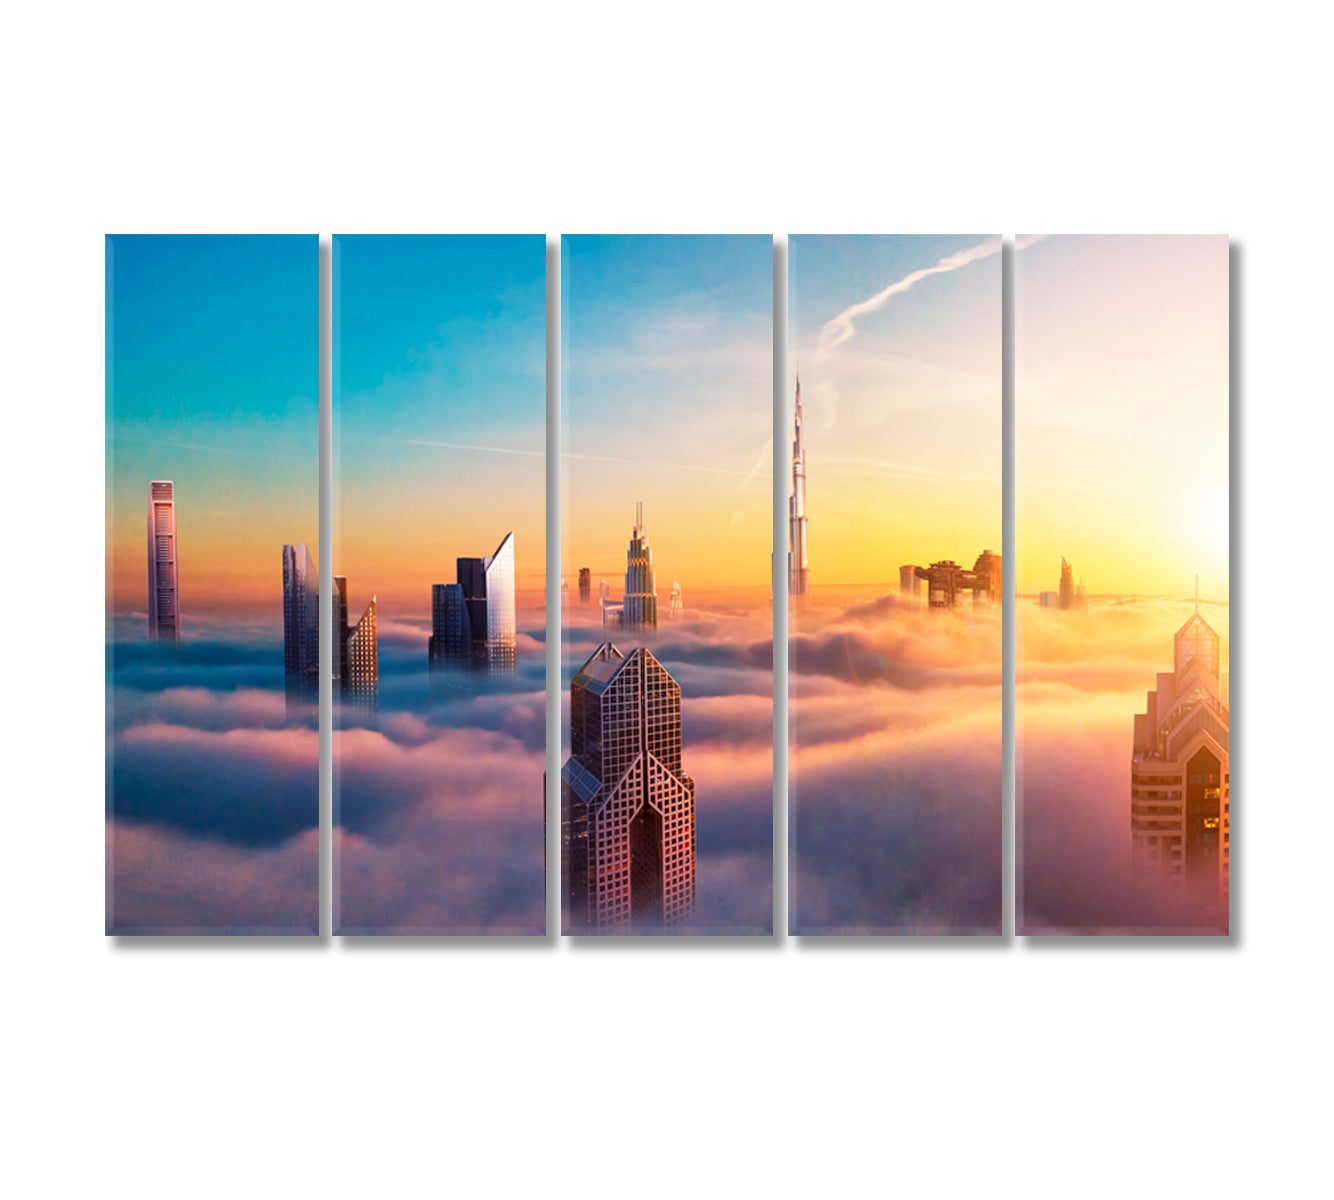 Dubai City Covered with Clouds Canvas Print-Canvas Print-CetArt-5 Panels-36x24 inches-CetArt